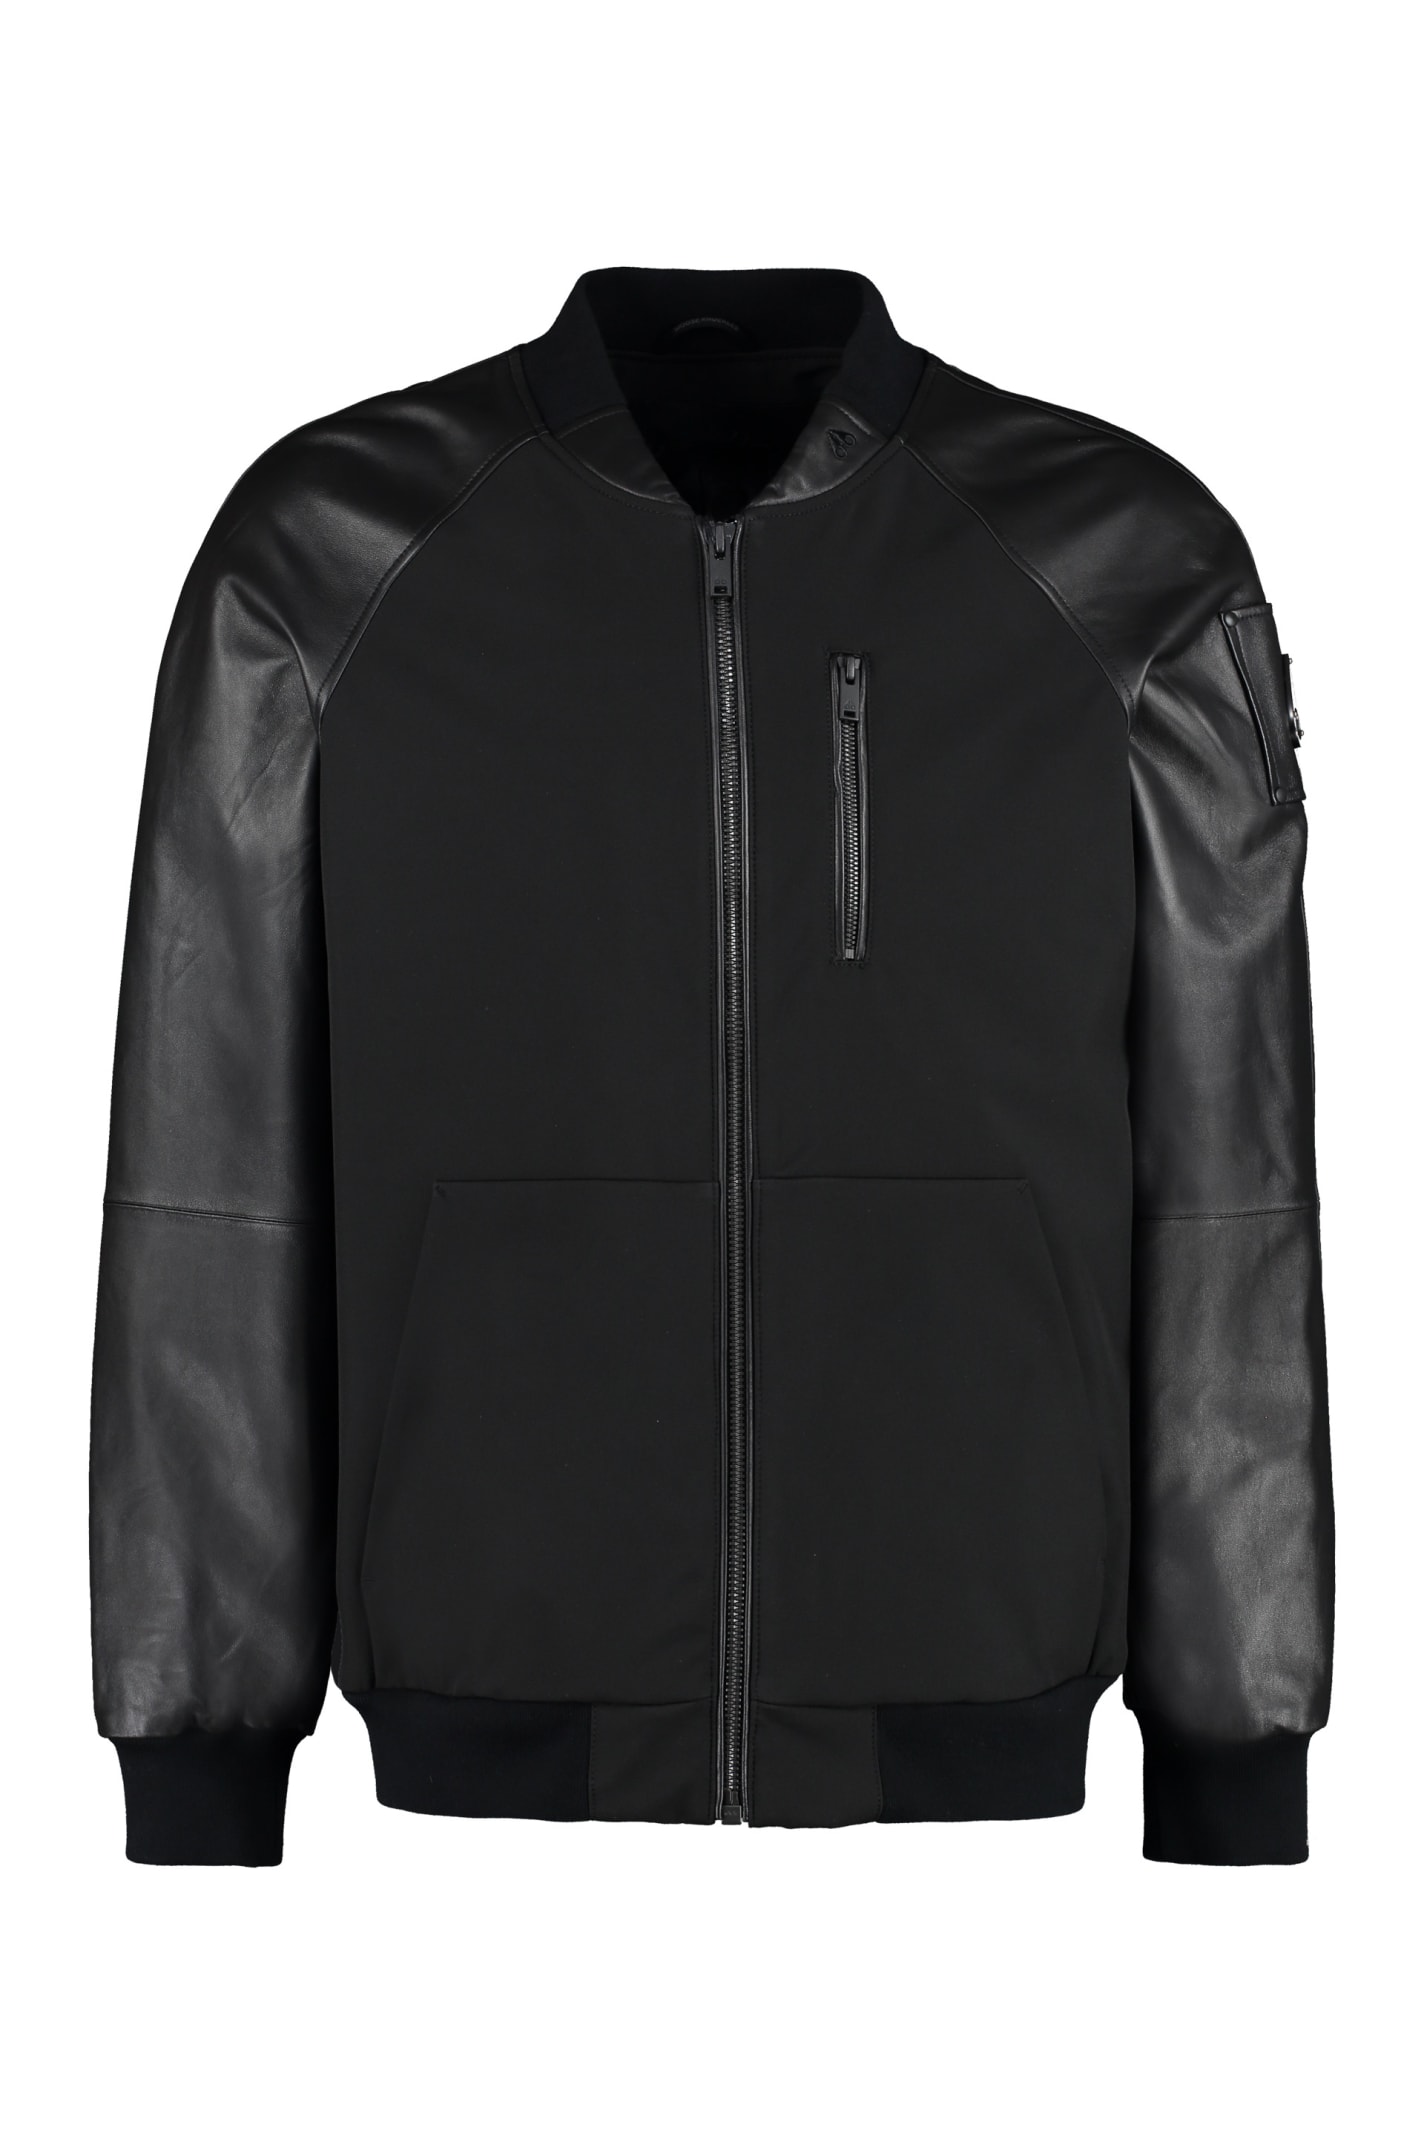 MOOSE KNUCKLES NYLON BOMBER JACKET WITH LEATHER DETAILS